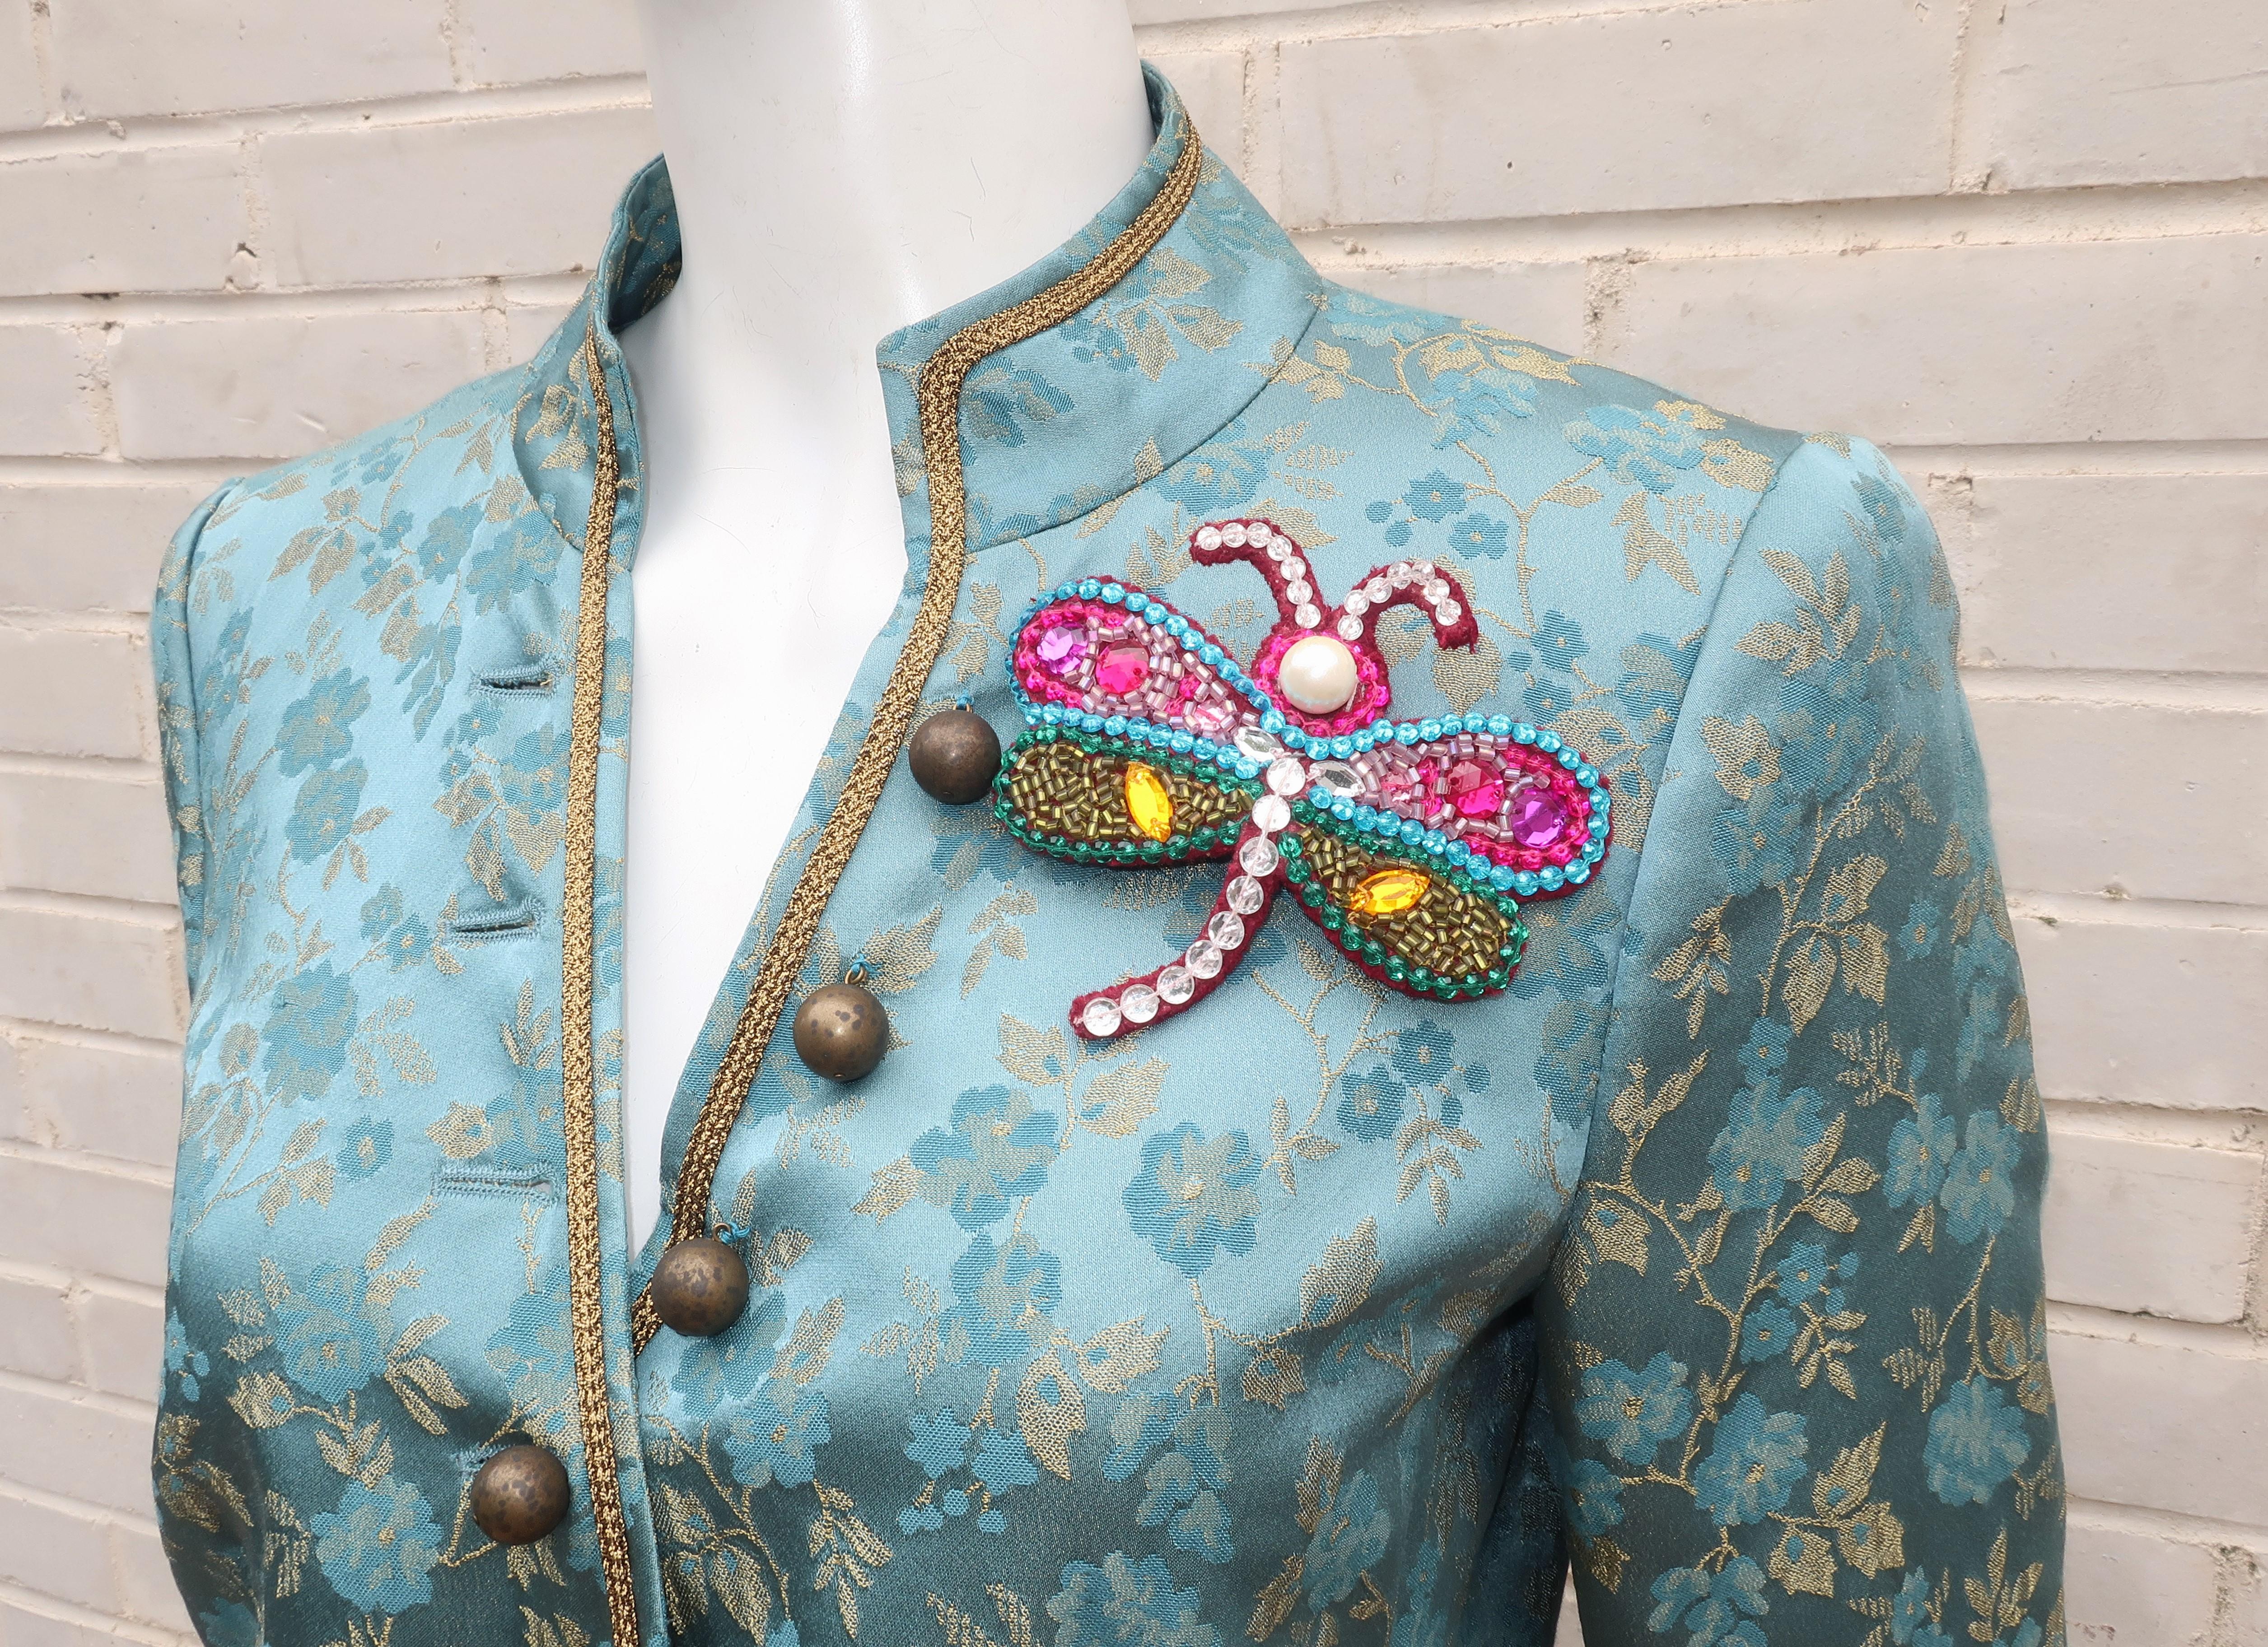 Women's Moschino ‘Bollywood’ Brocade Jacket With Dragonfly Motif